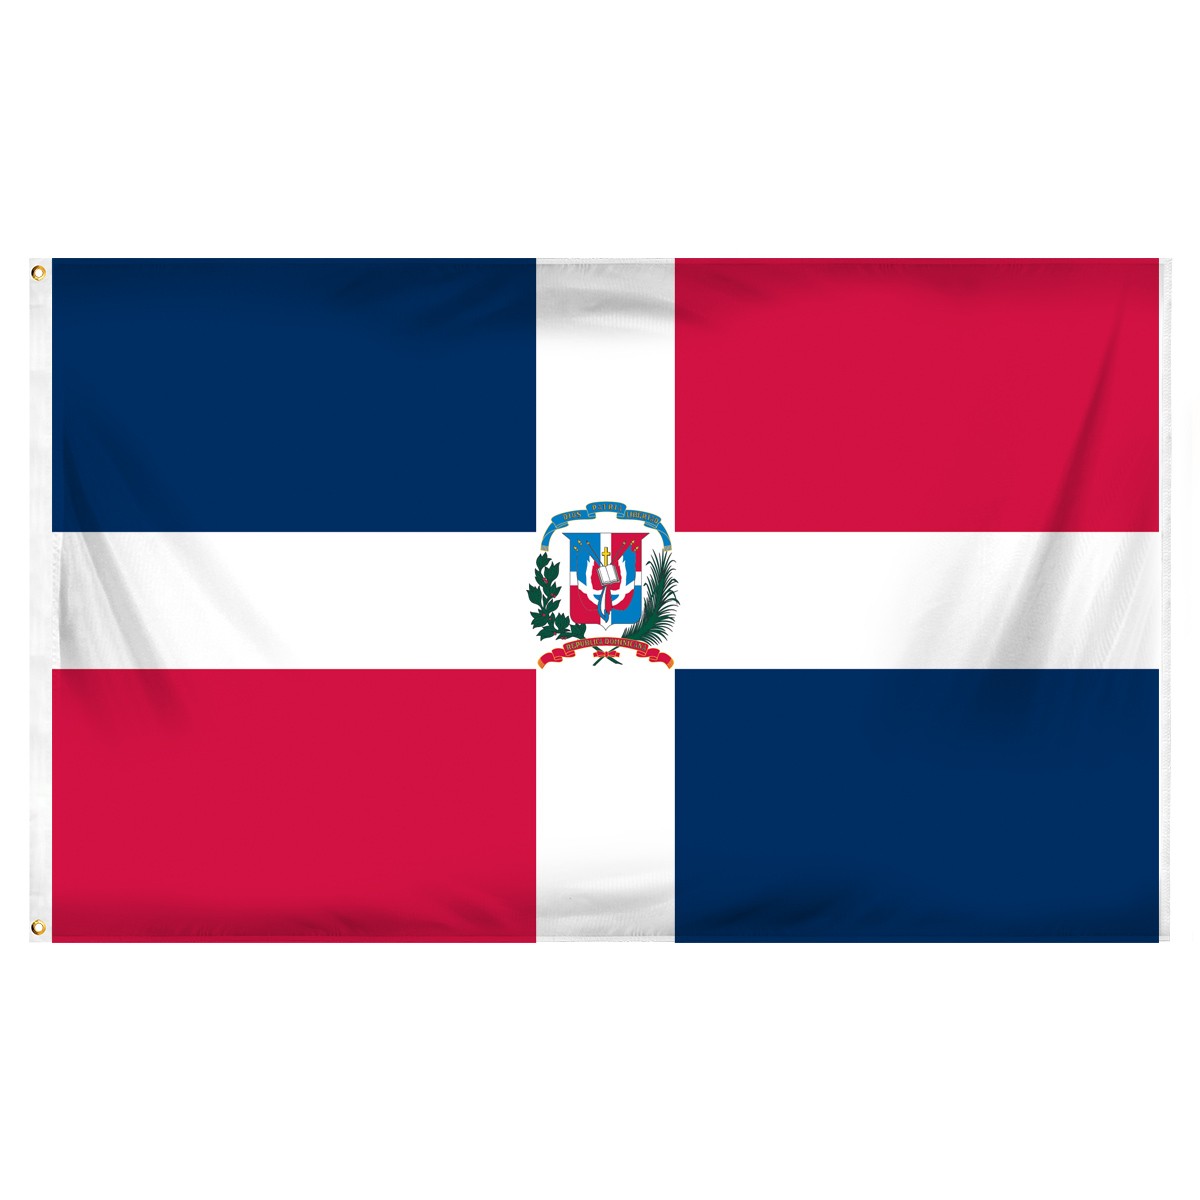 Dominican Republic Posters and Banners